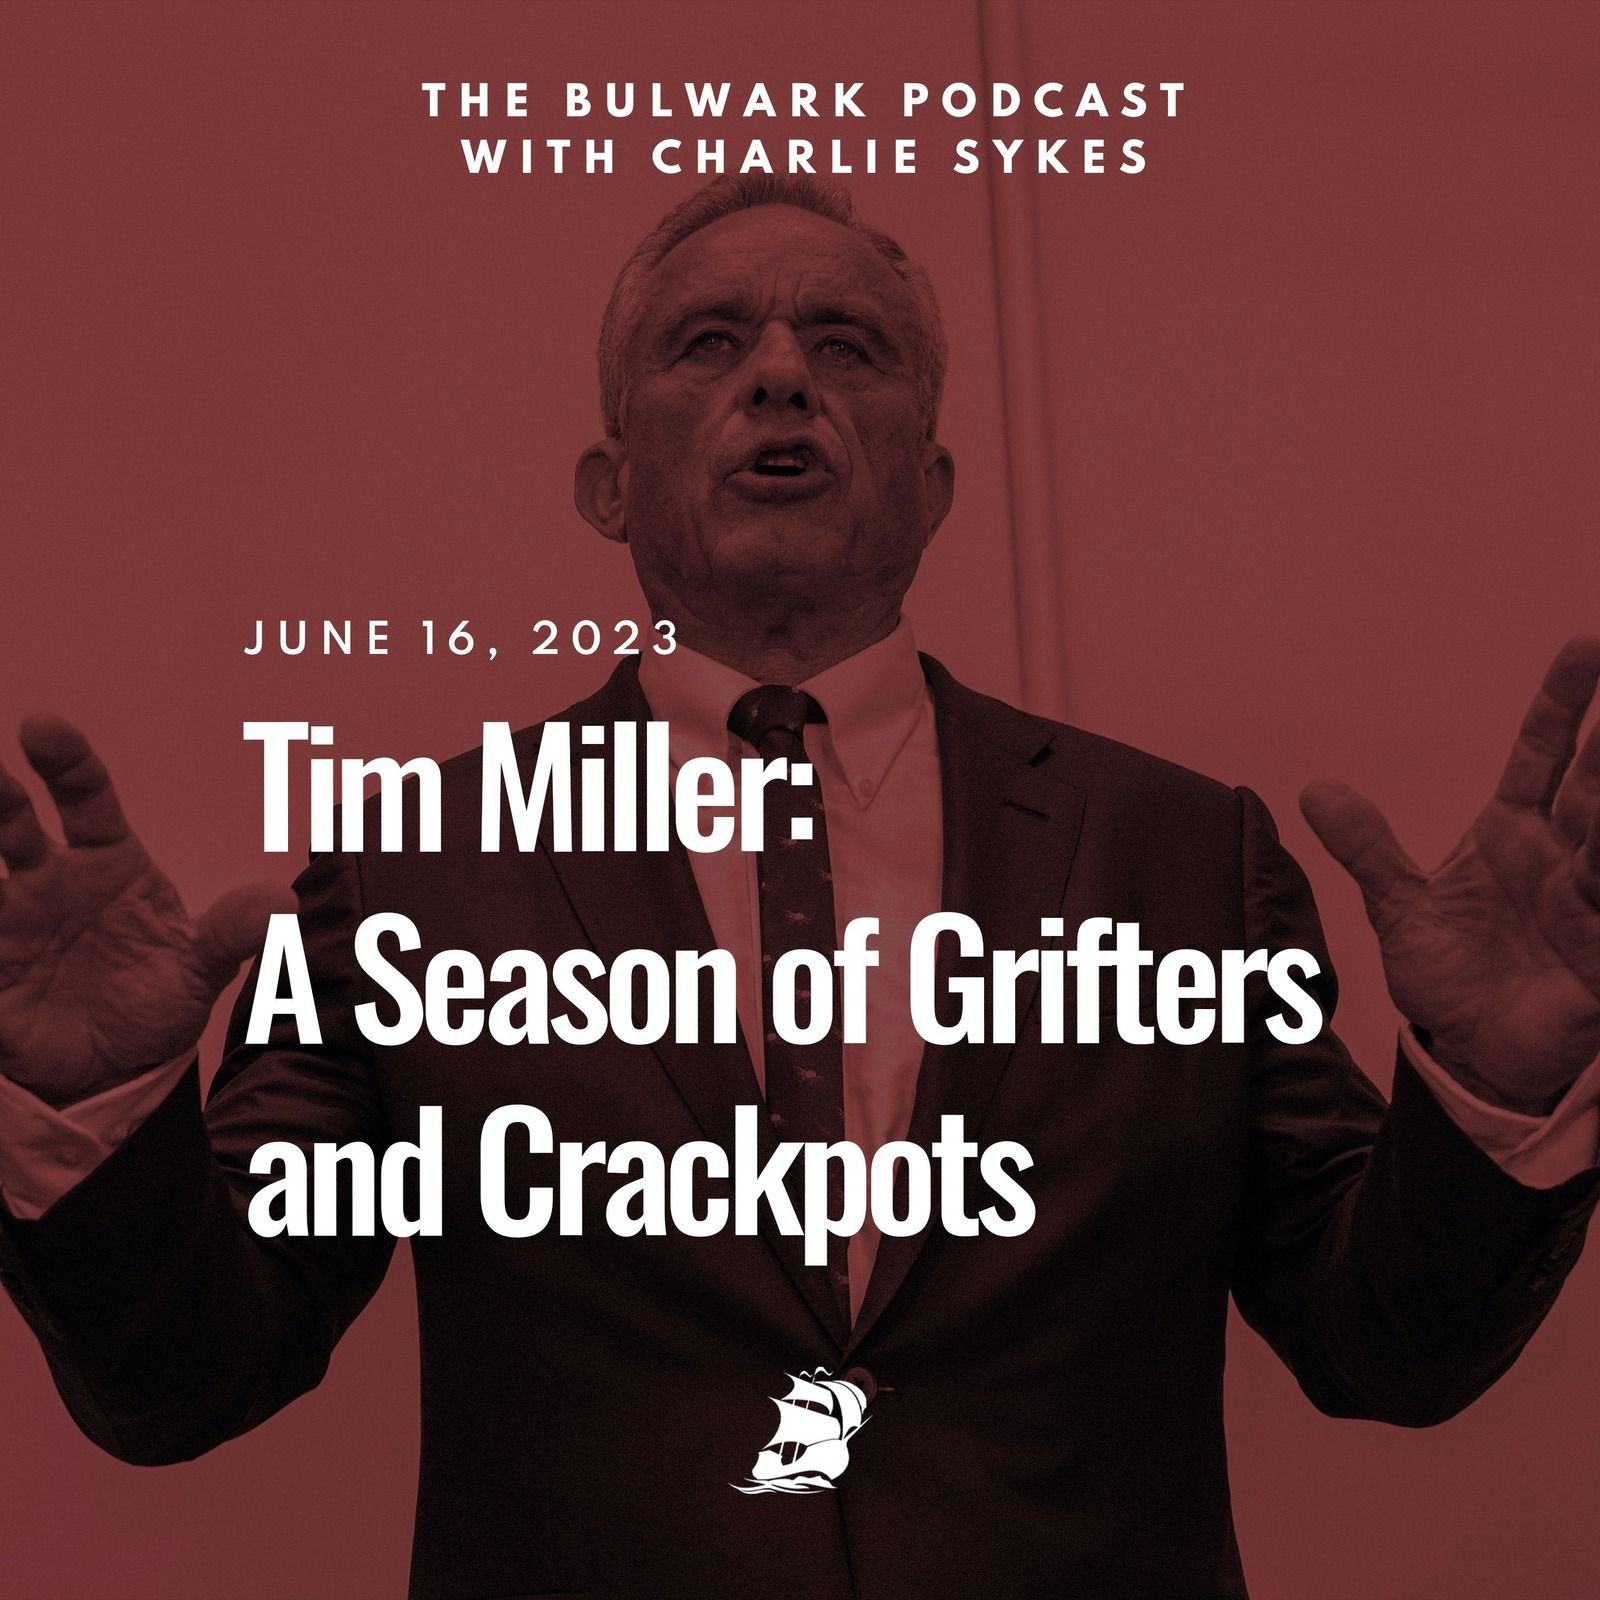 Tim Miller: A Season of Grifters and Crackpots